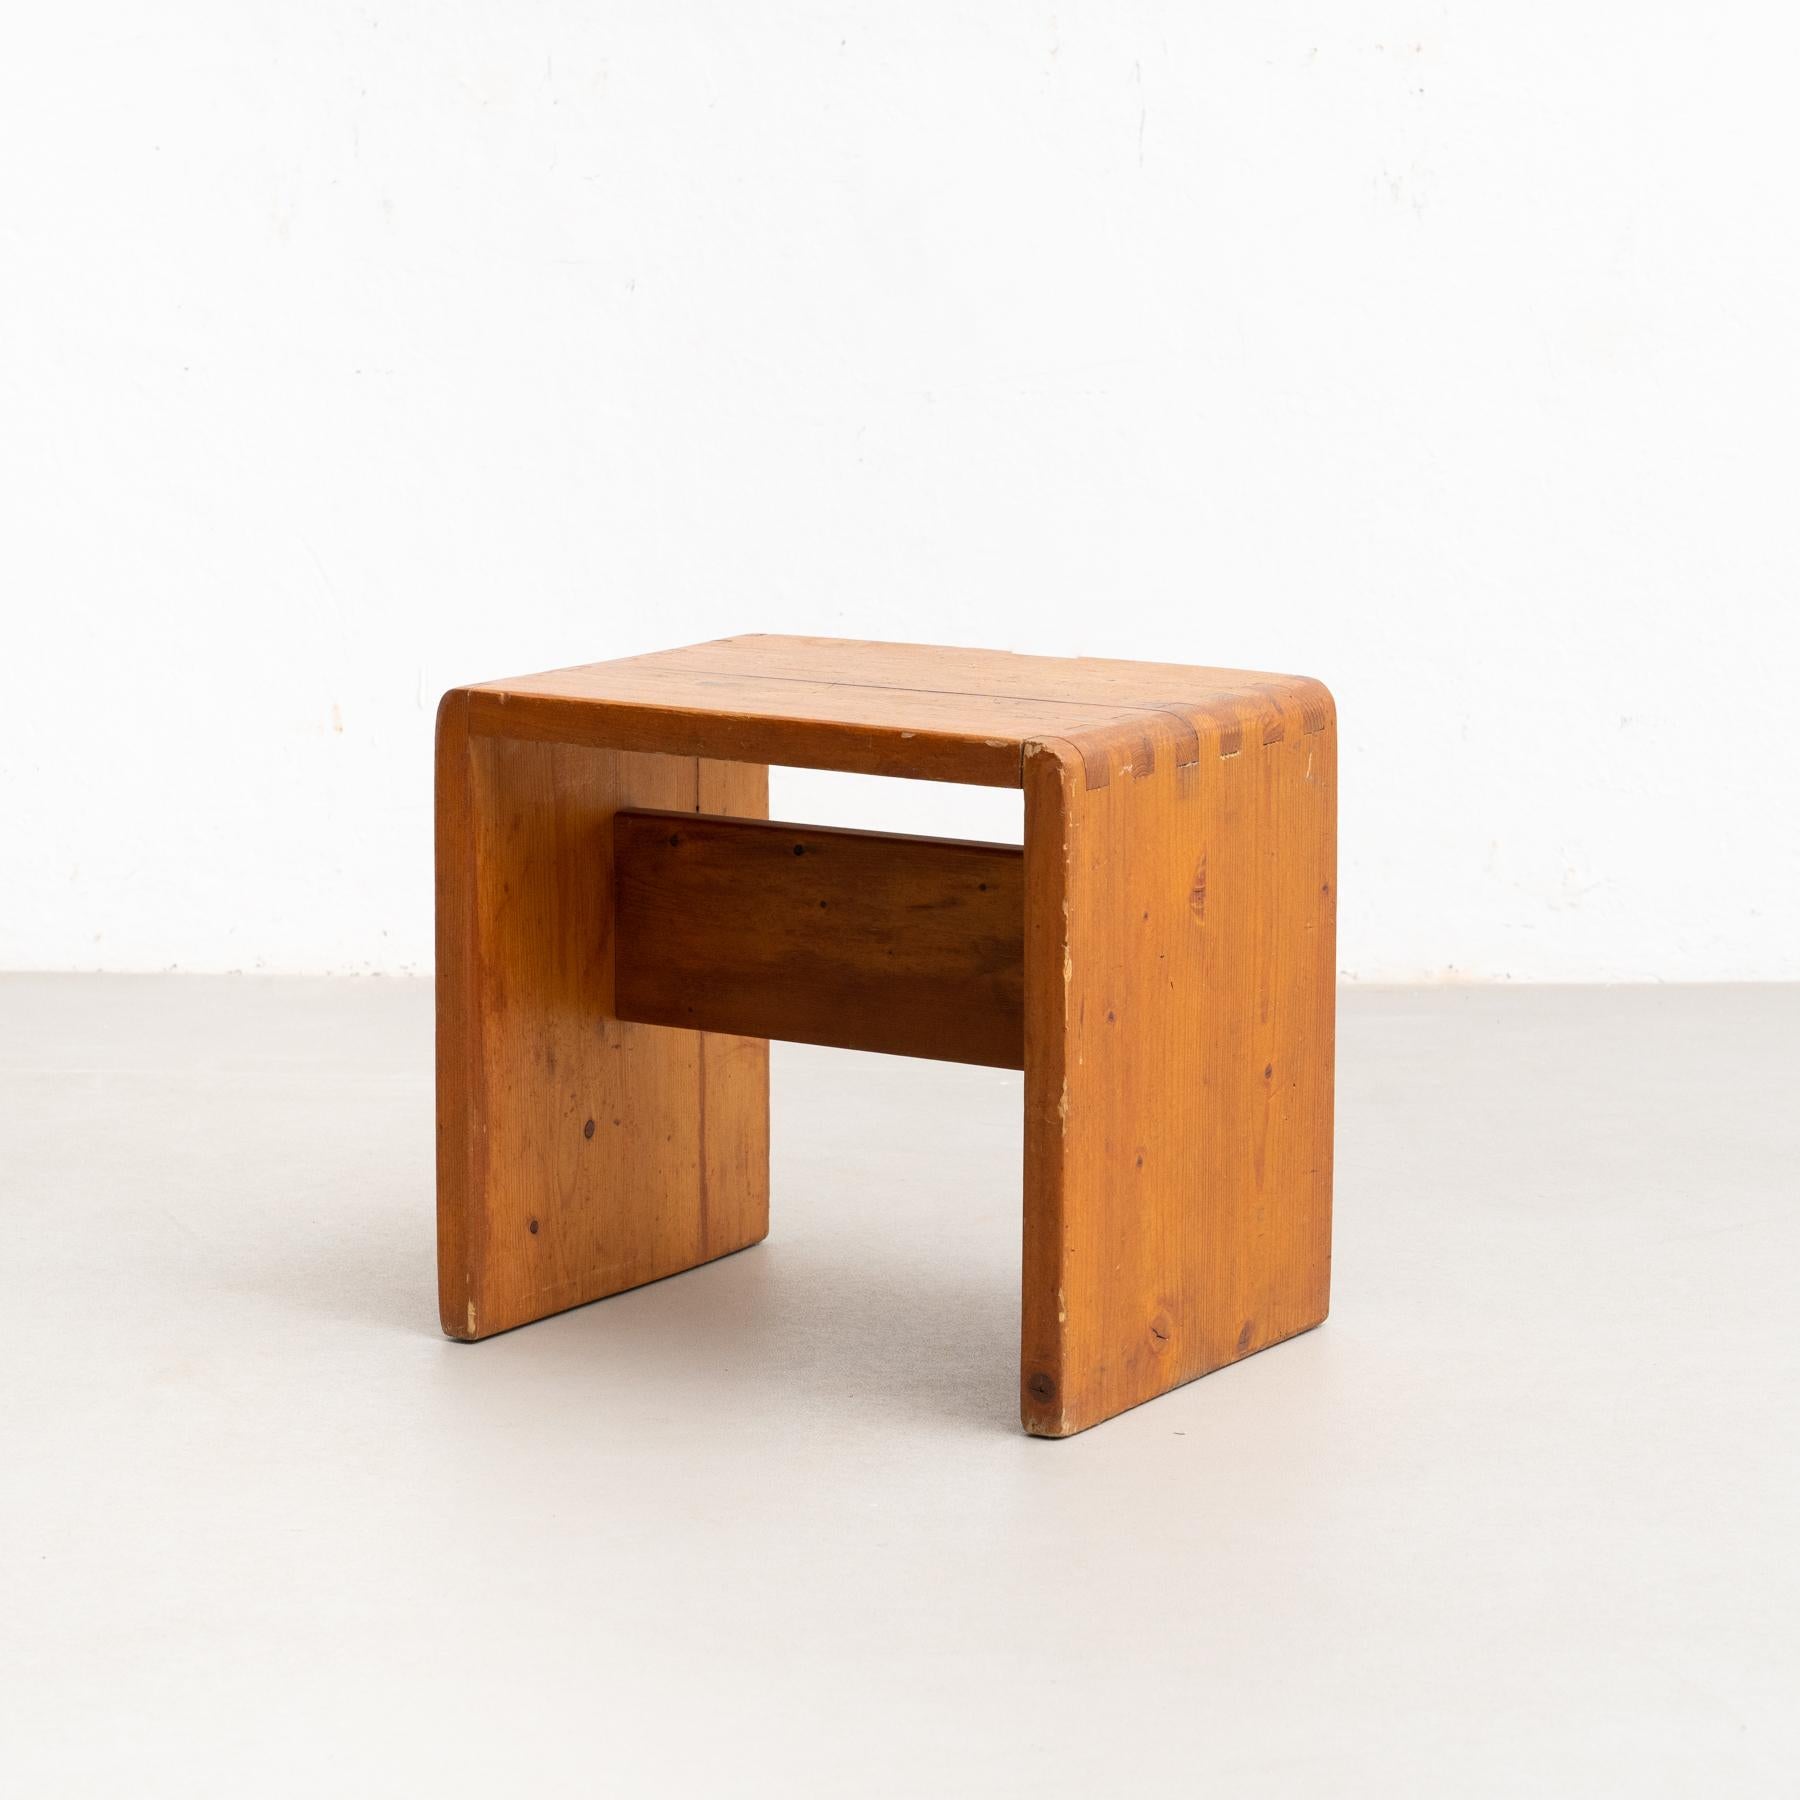 Charlotte Perriand Pine Wood Stool for Les Arcs, circa 1950 For Sale 1